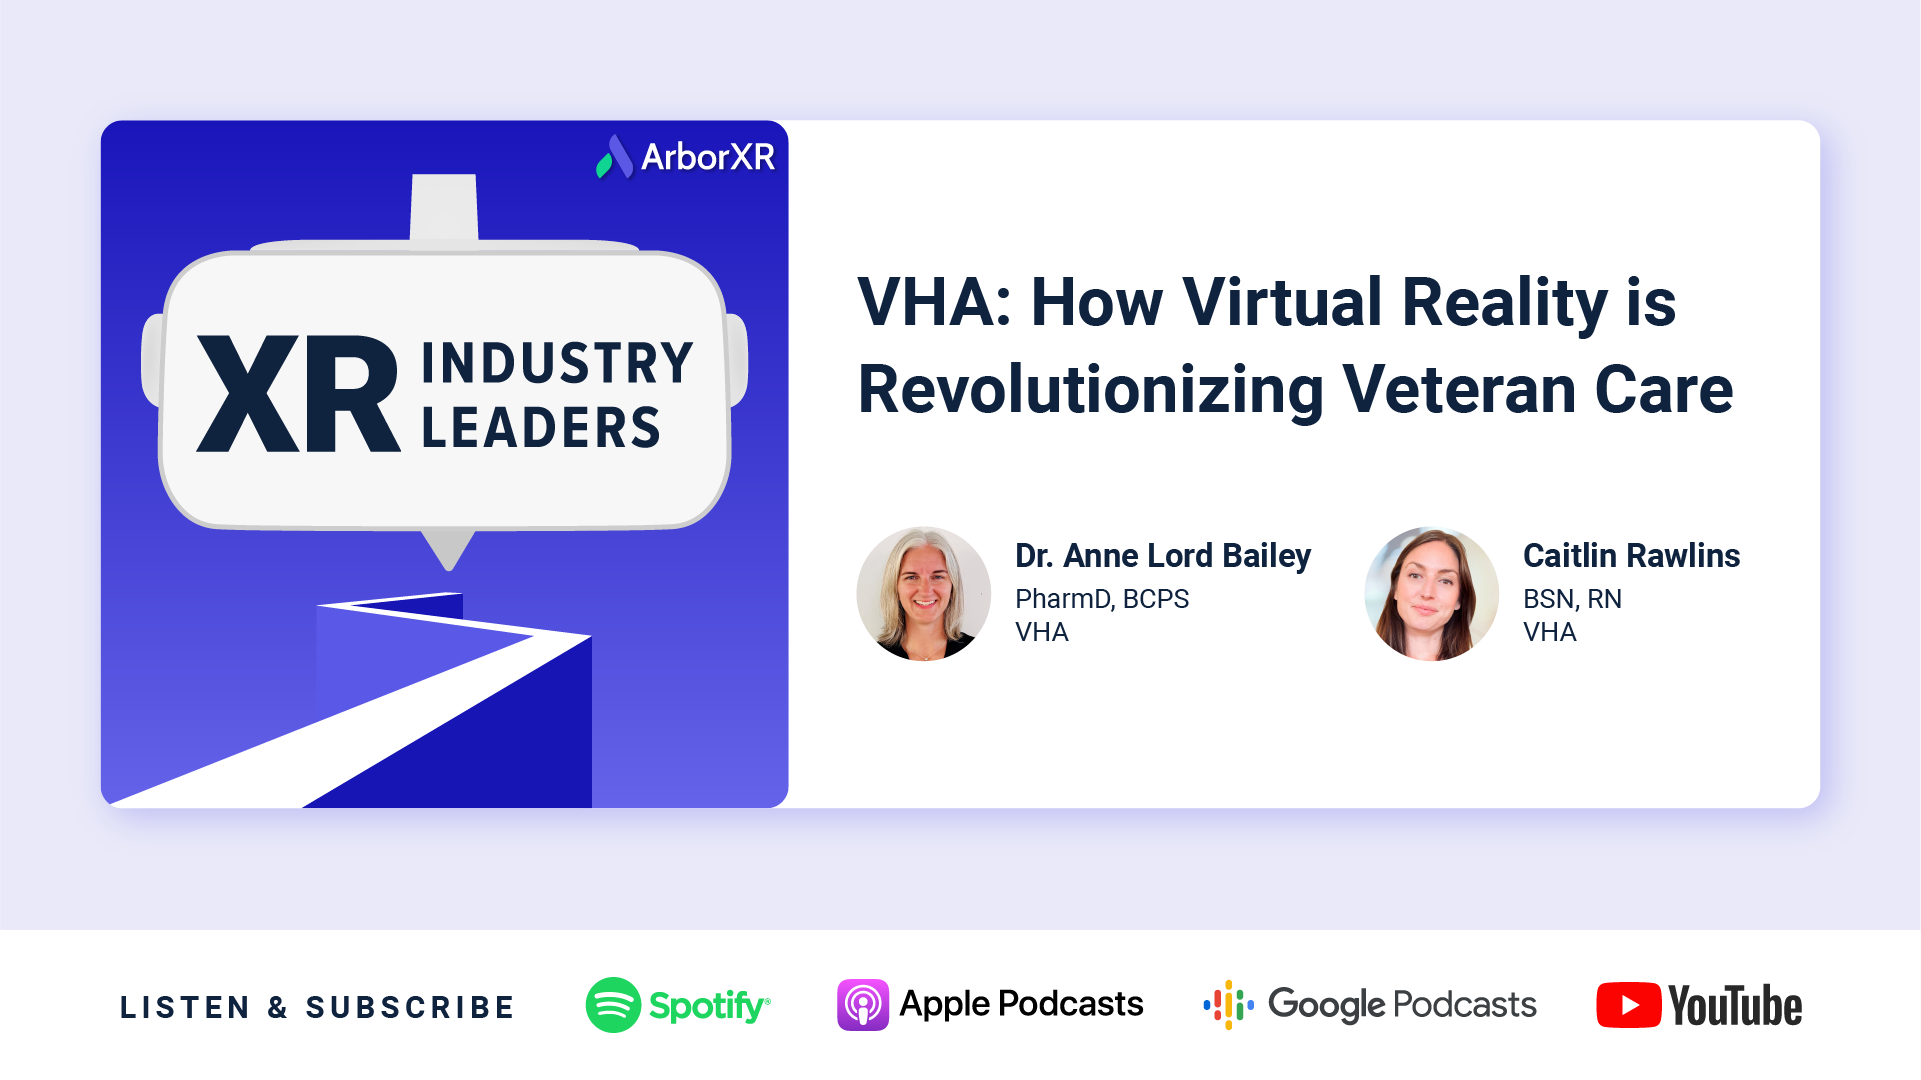 xr industry leaders with arborxr and vha